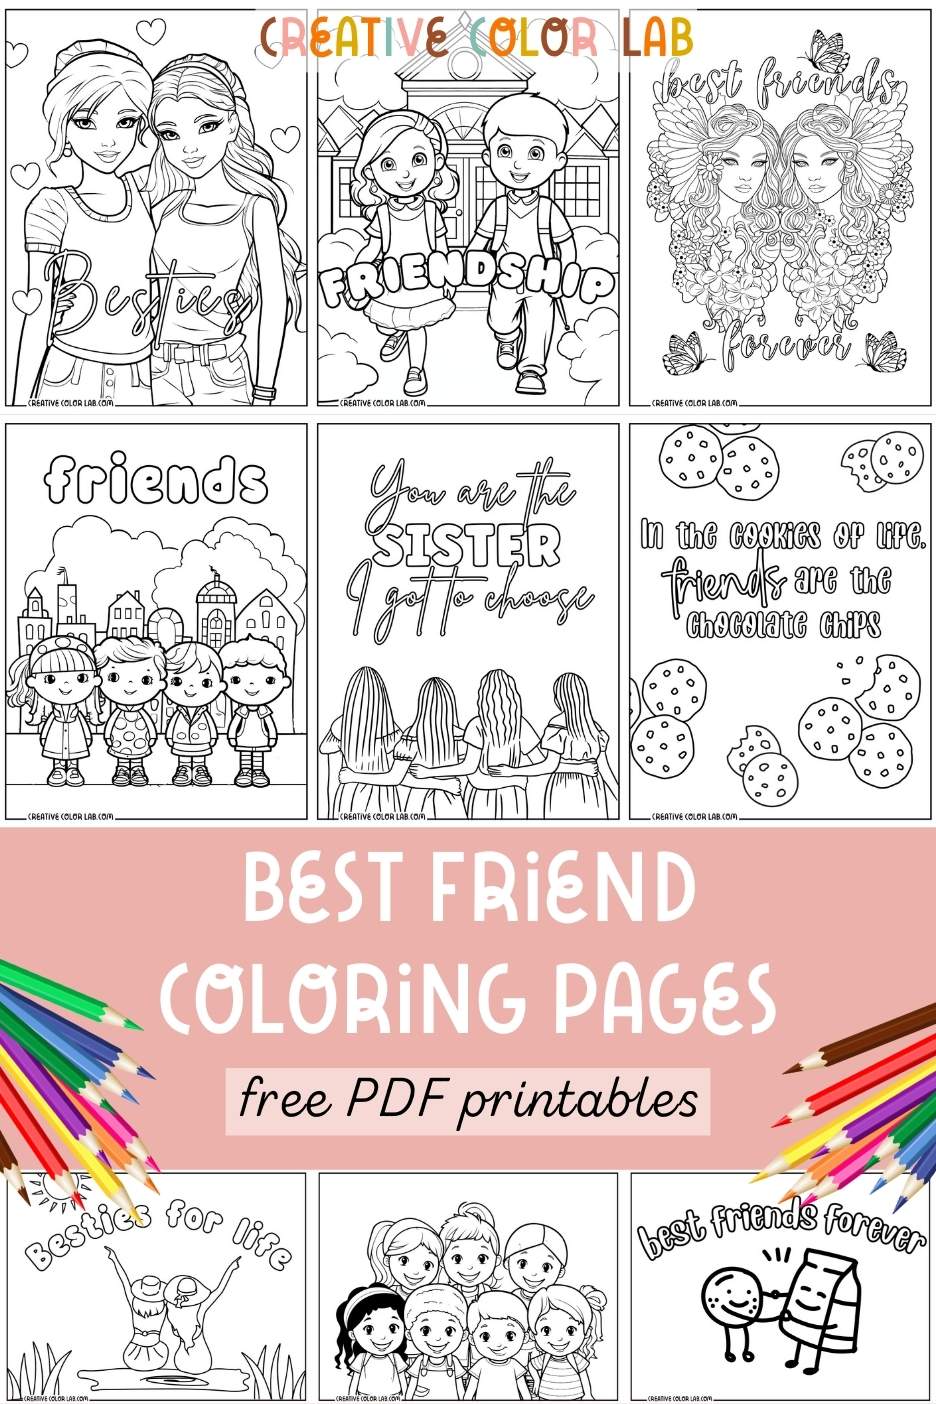 Collection of free printable best friend coloring pages to download.